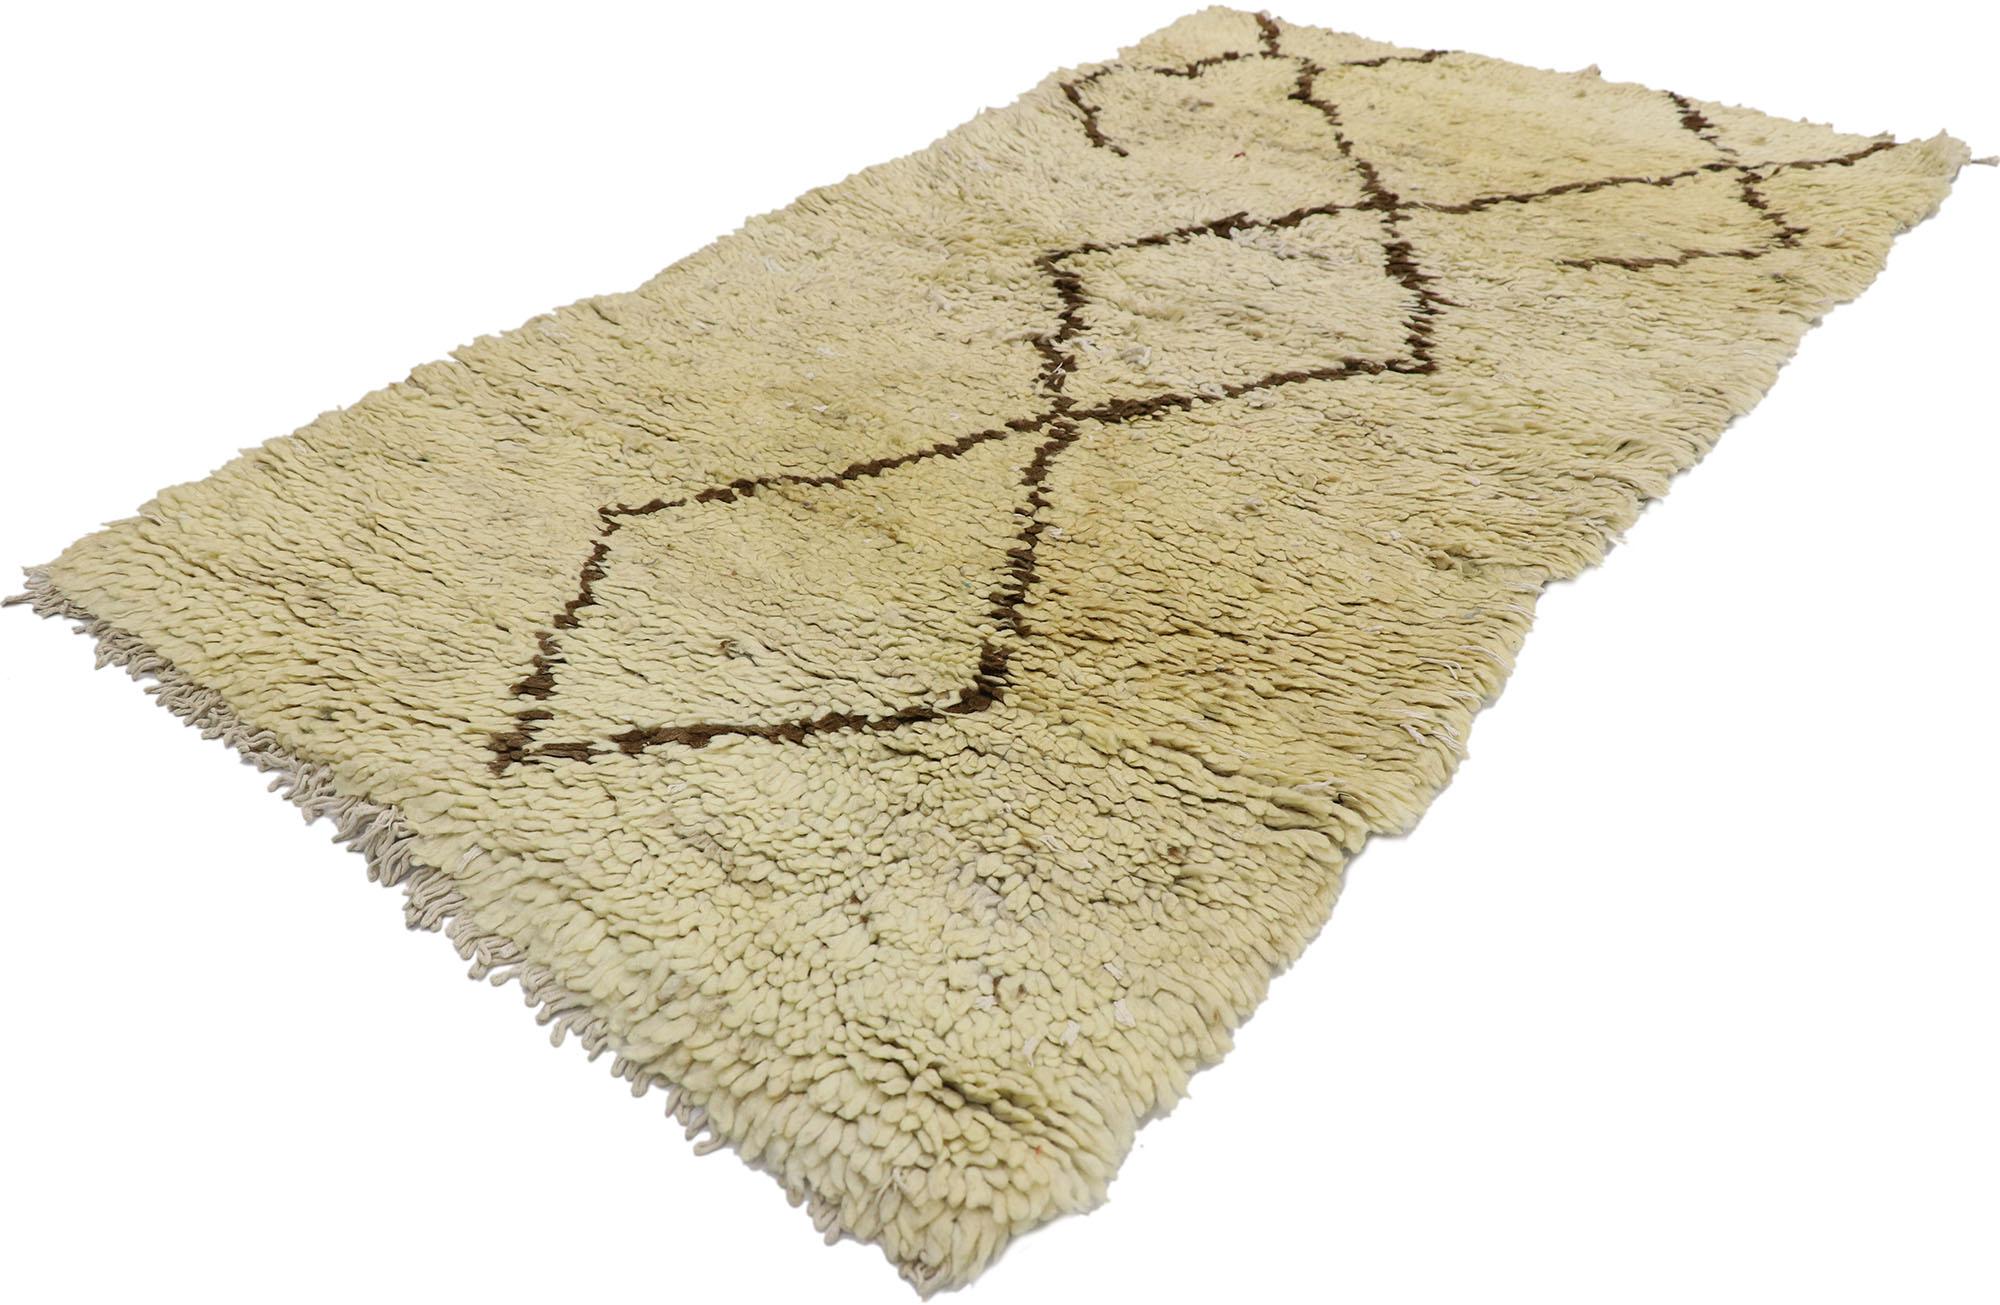 21575 Vintage Berber Moroccan Rug, 02'10 x 05'06.
Nomadic charm meets relaxed familiarity in this hand knotted wool vintage Moroccan rug. The ambiguous lozenge design and earthy colorway woven into this piece work together to bring forth a rustic